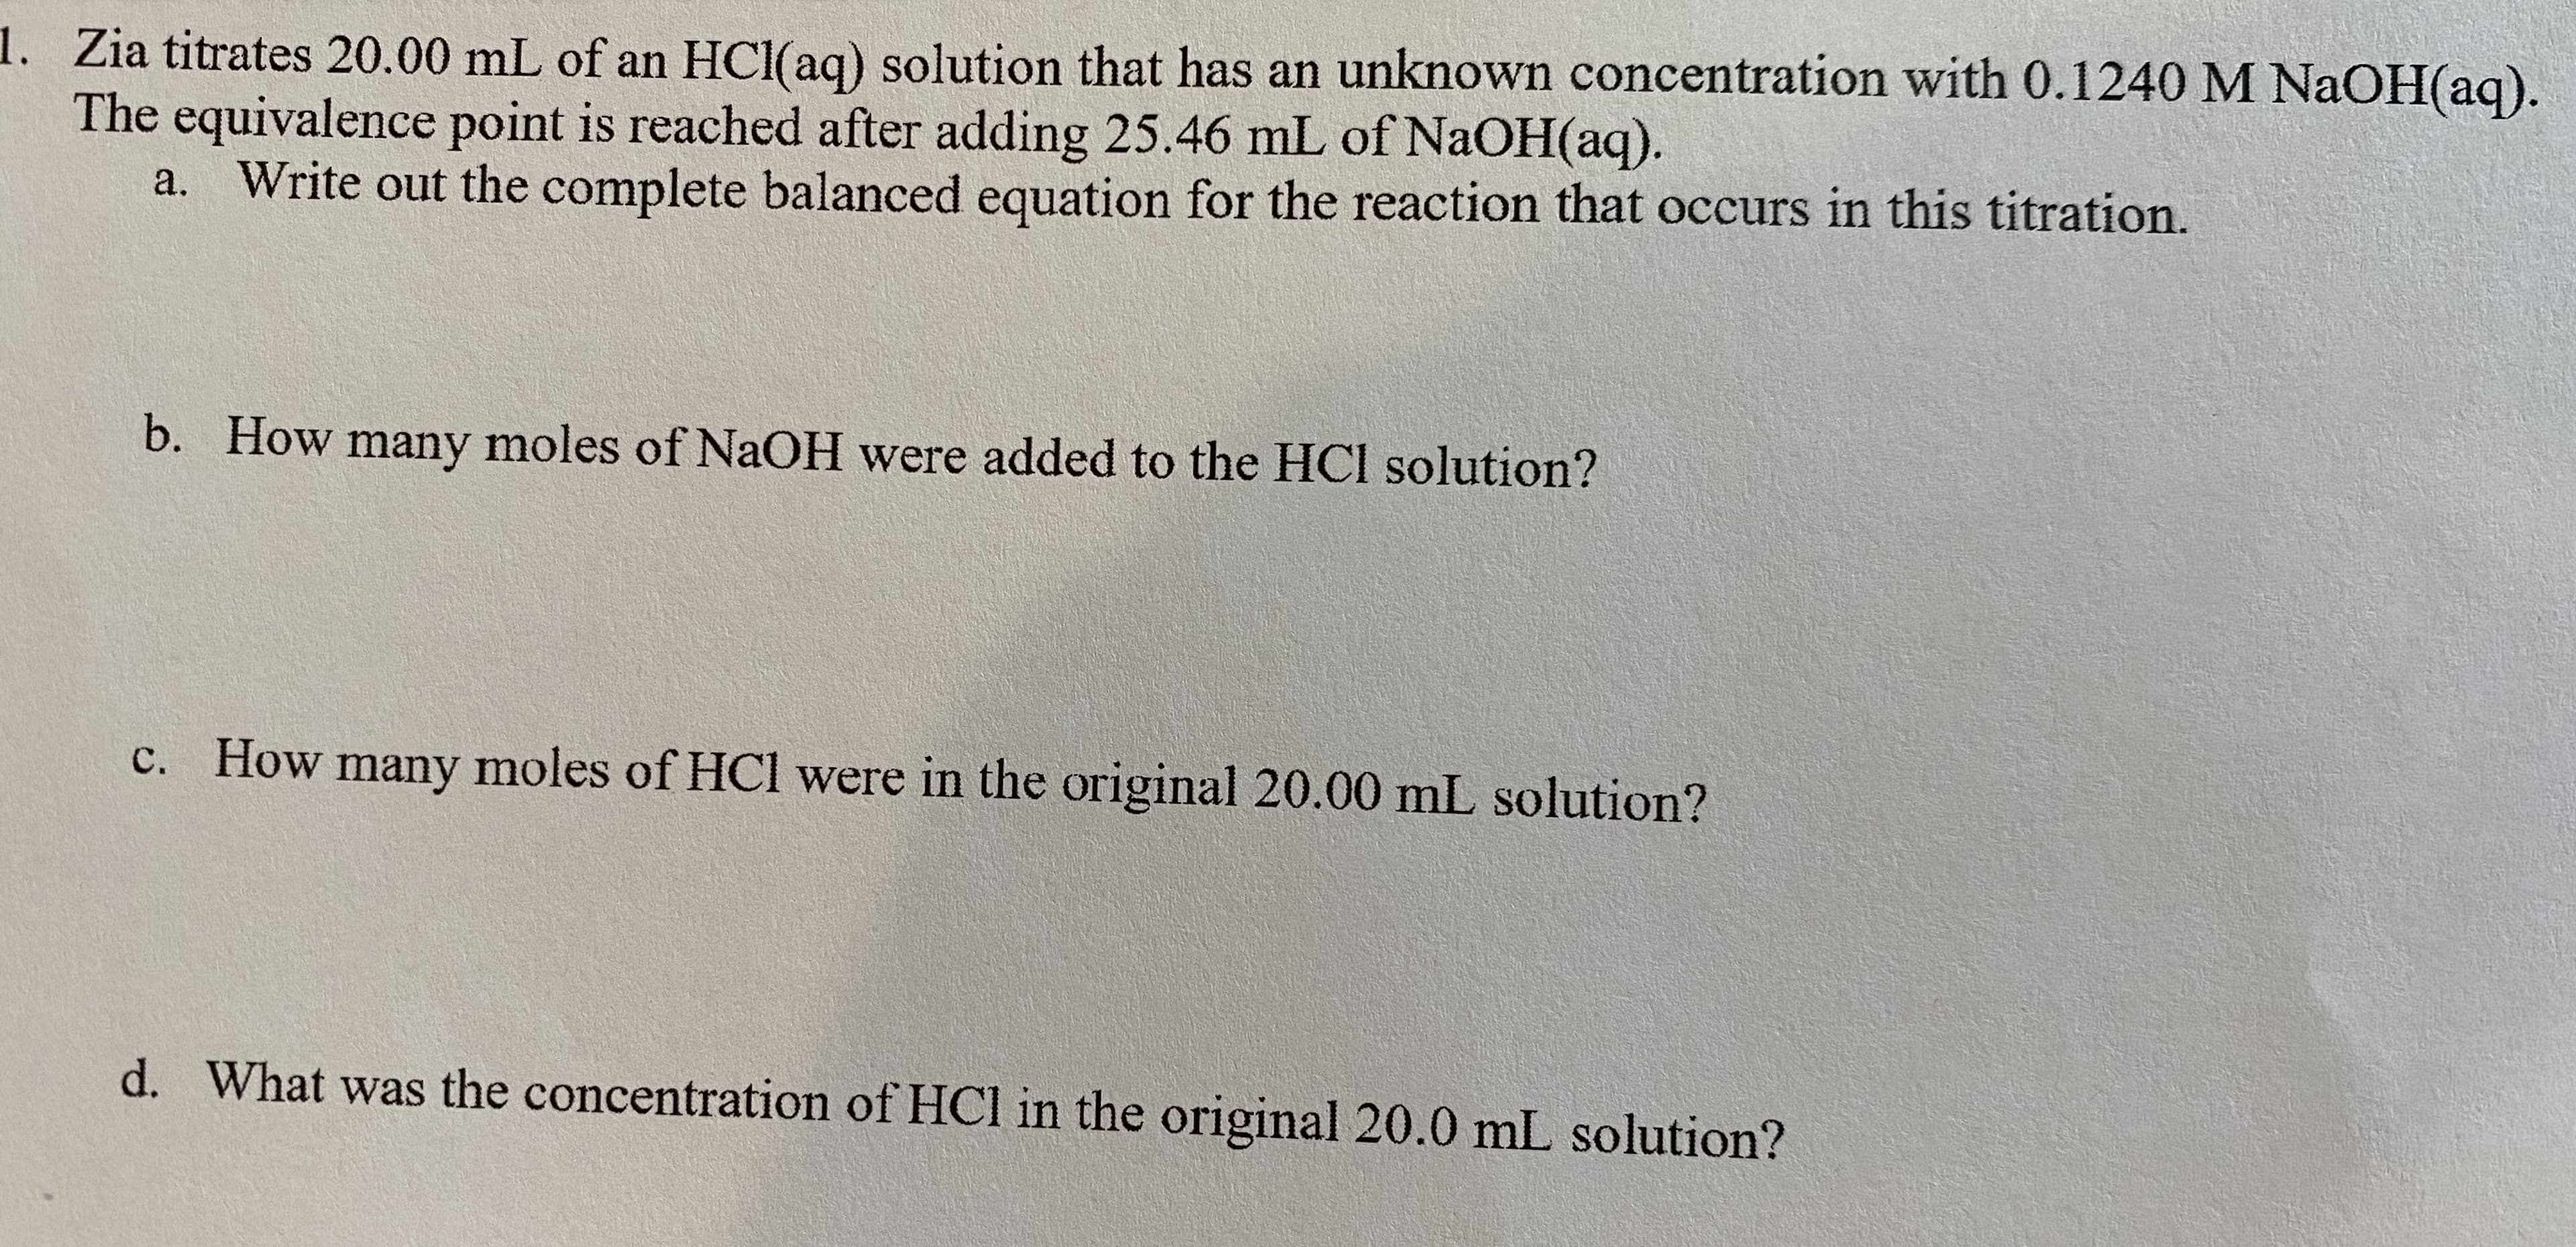 1. Zia titrates 20.00 mL of an HCl(aq) solution that has an unknown concentration with 0.1240 M NaOH(aq).
The equivalence point is reached after adding 25.46 mL of NaOH(aq).
Write out the complete balanced equation for the reaction that occurs in this titration.
b. How many moles of NaOH were added to the HCI solution?
c. How many moles of HCl were in the original 20.00 mL solution?
d. What was the concentration of HCl in the original 20.0 mL solution?
